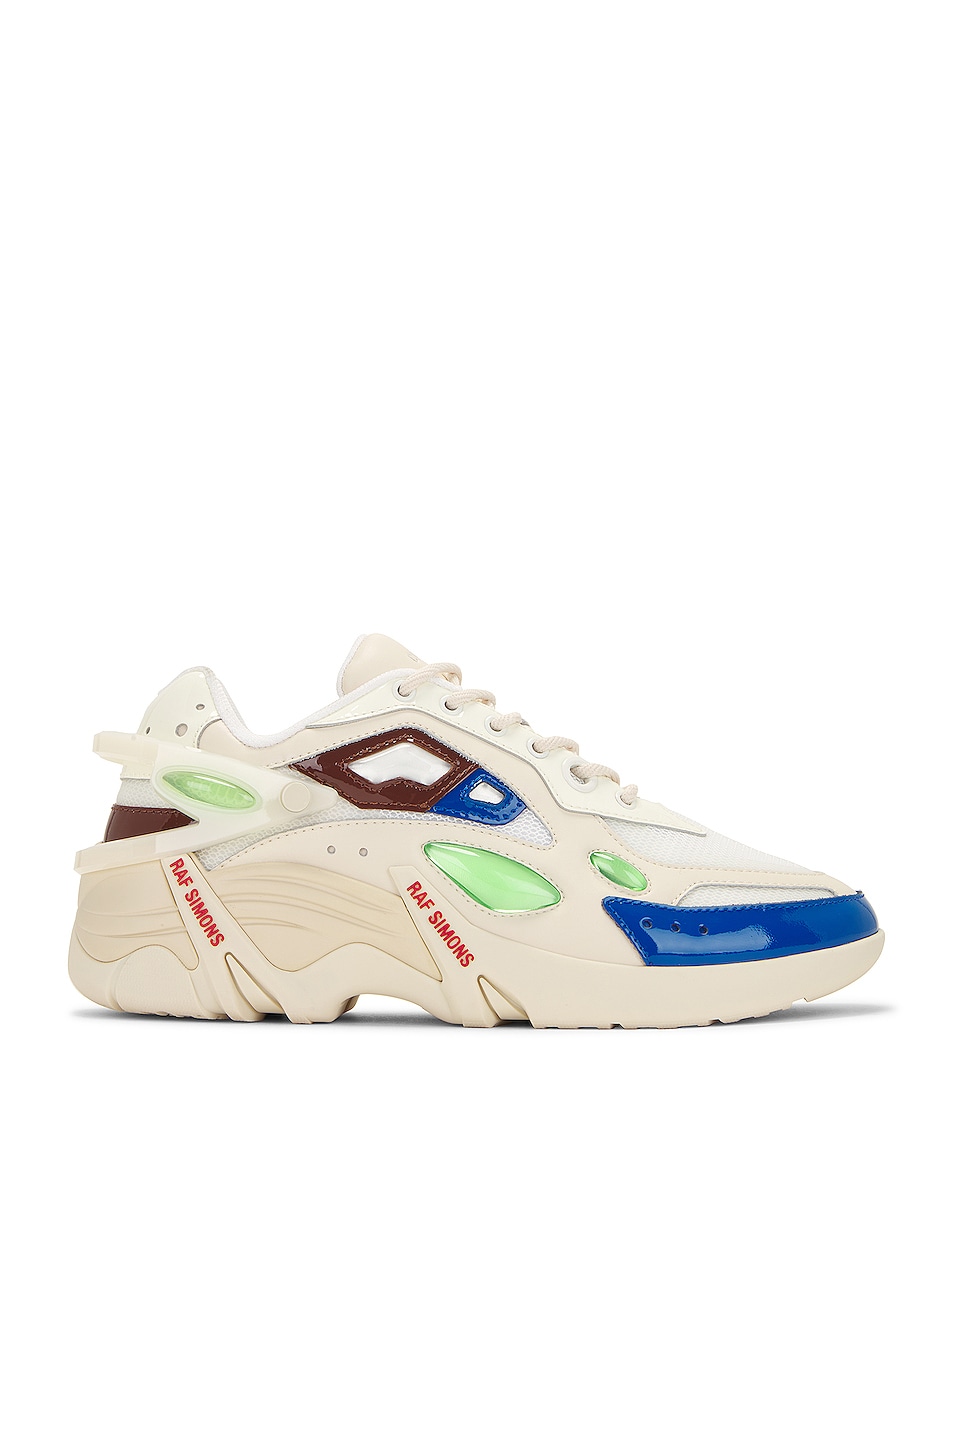 Image 1 of Raf Simons Cylon-21 Sneakers in Cream, Brown, & Blue